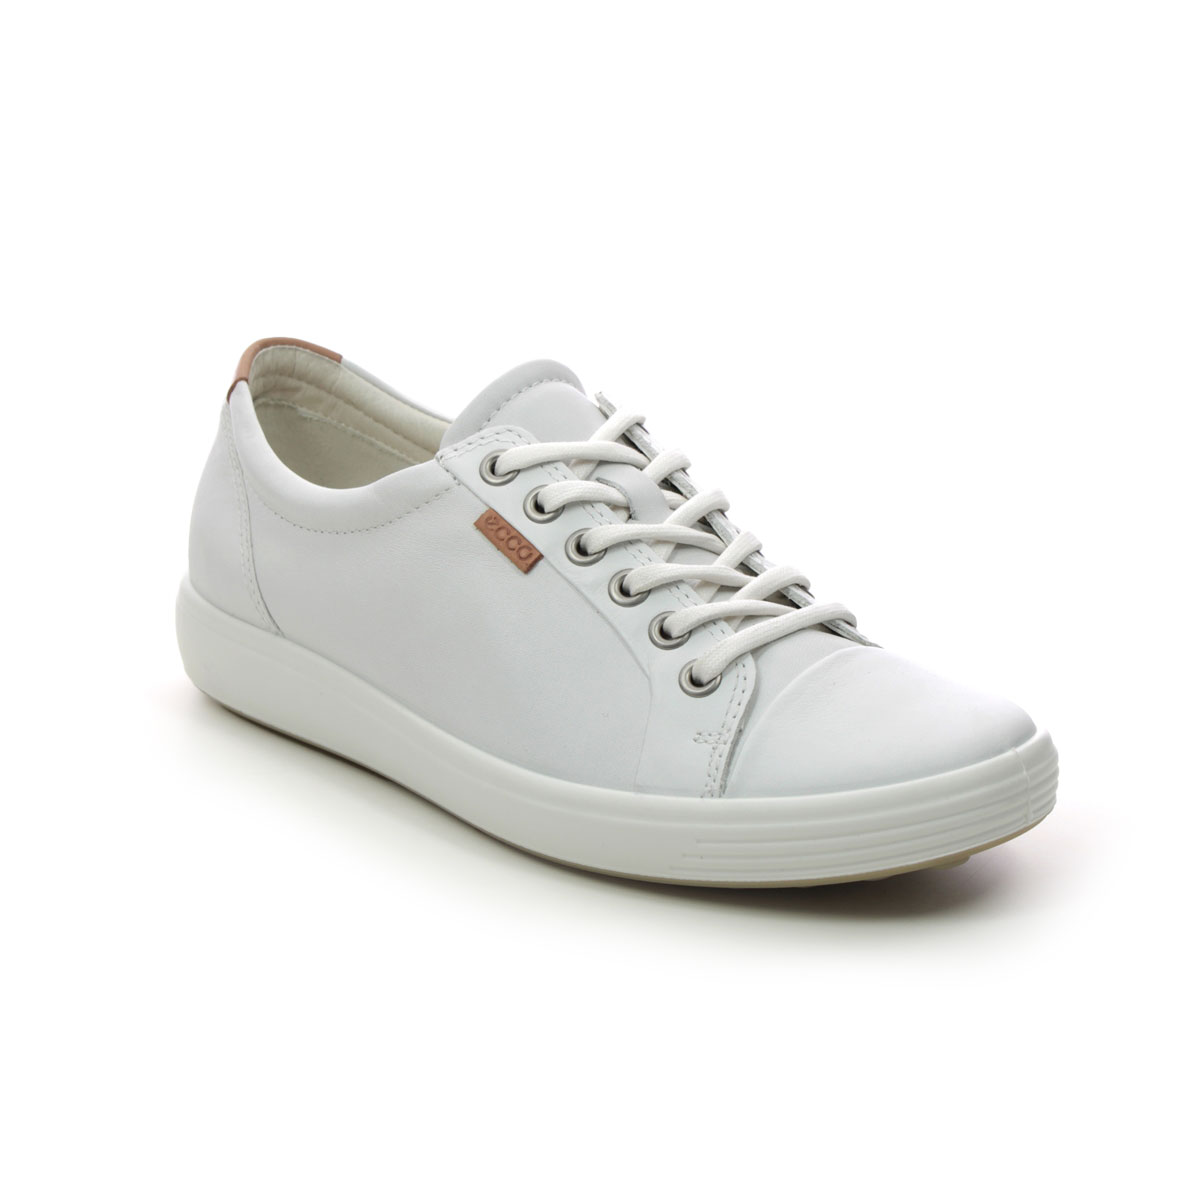 Ecco Soft 7 Lace White Leather Womens Trainers 430003-01007 In Size 37 In Plain White Leather